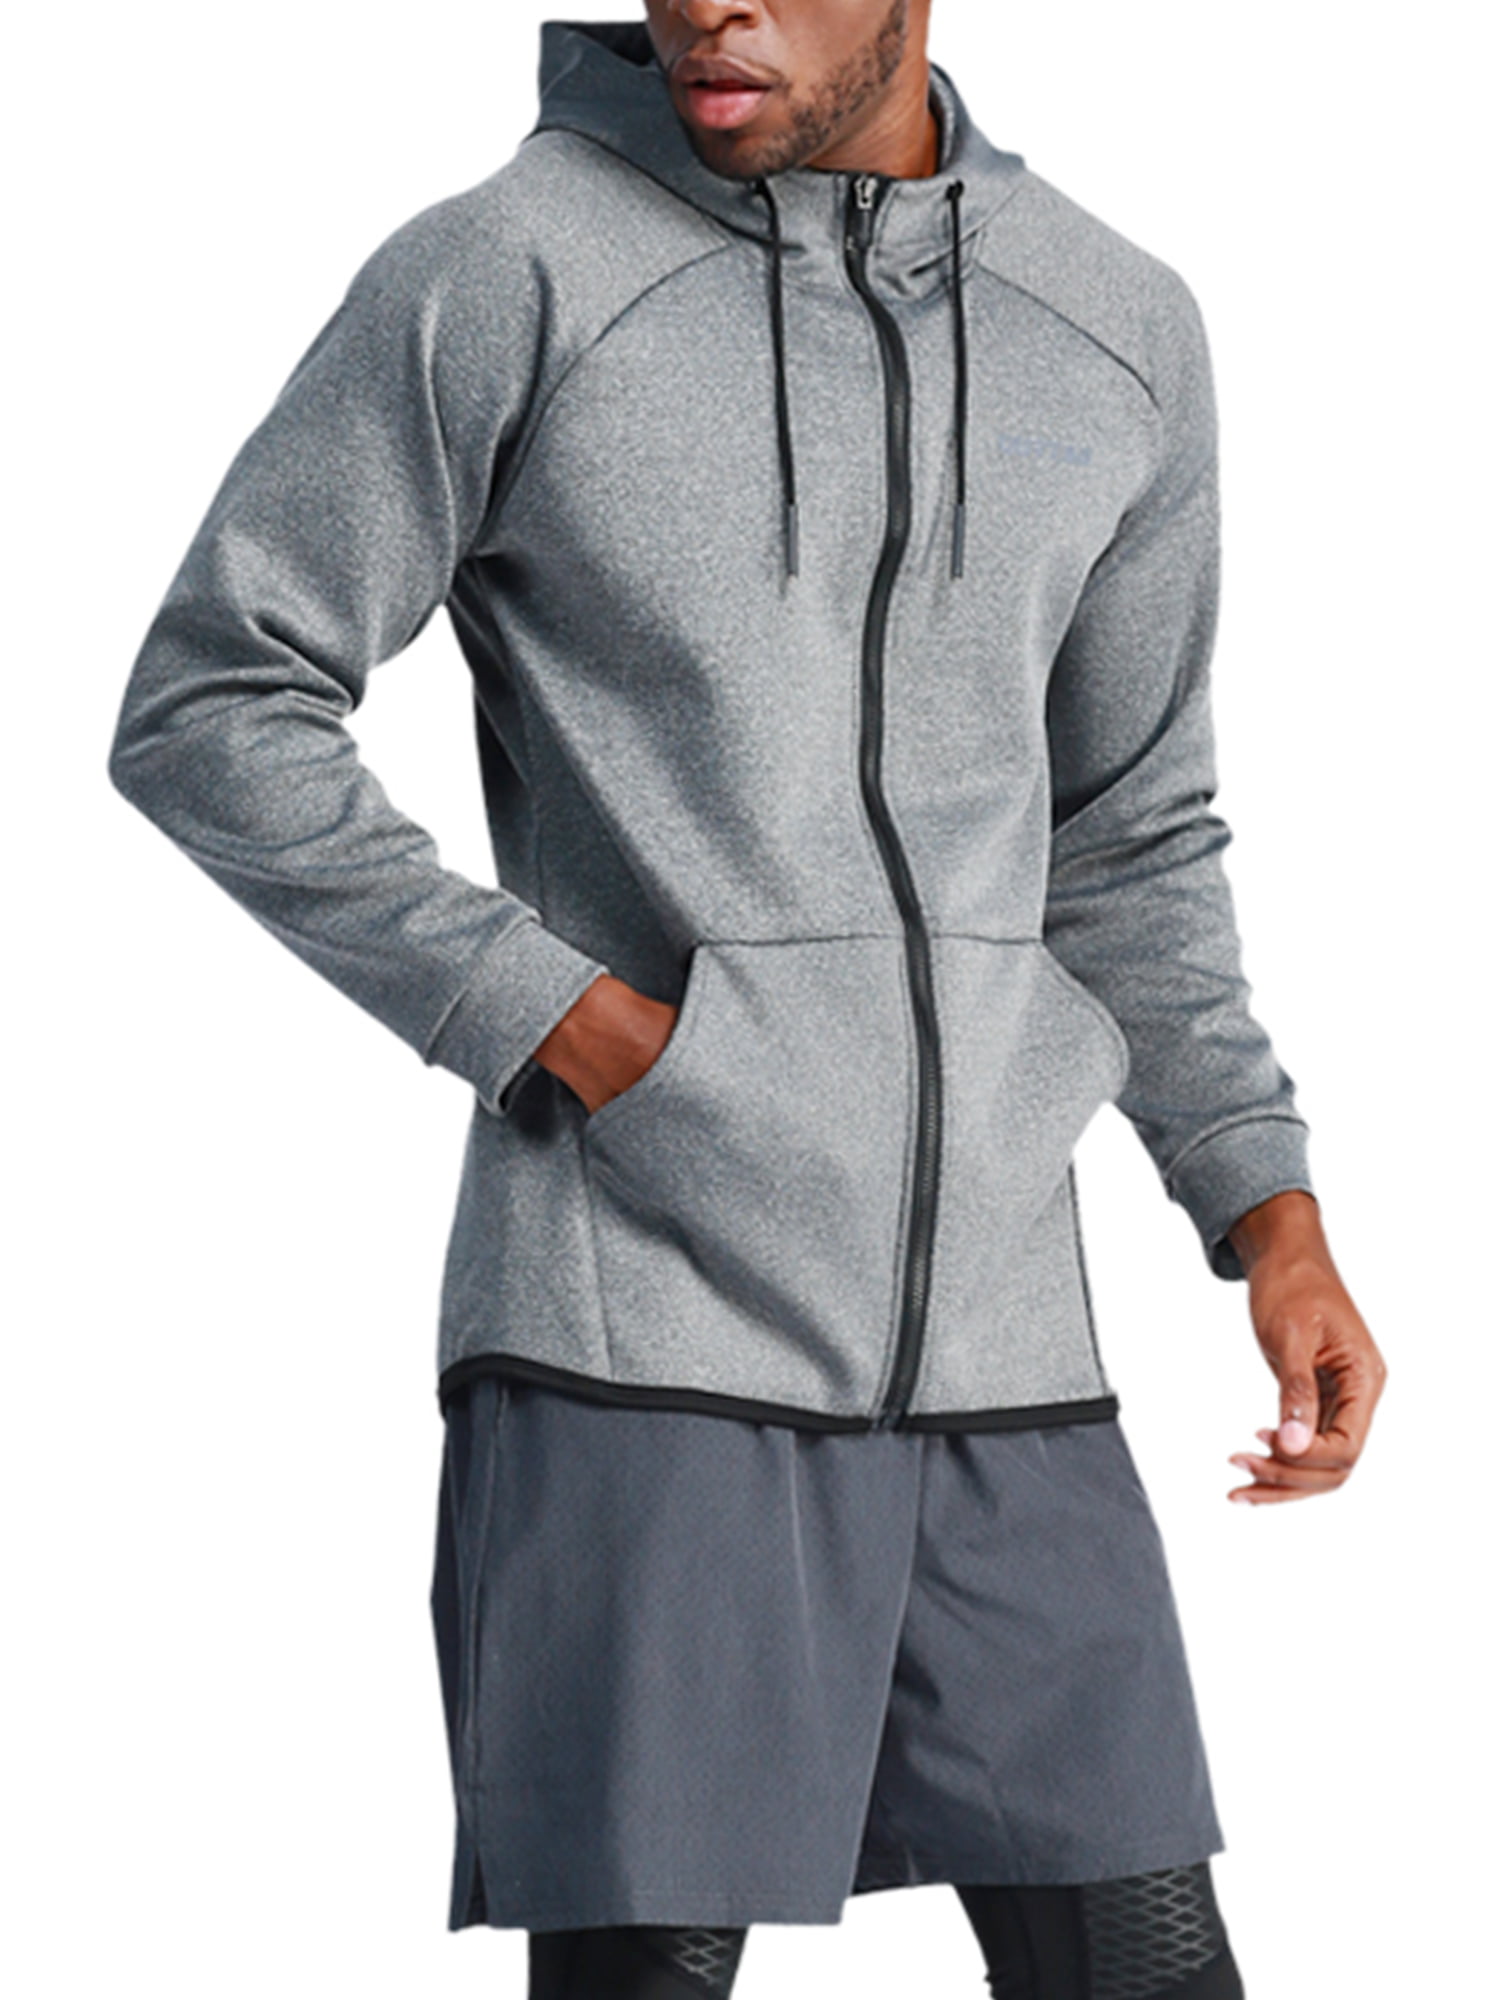 Adult Plain Hooded Jumper Pullover Hoodie Top Gym Jogging Fitness Sports 